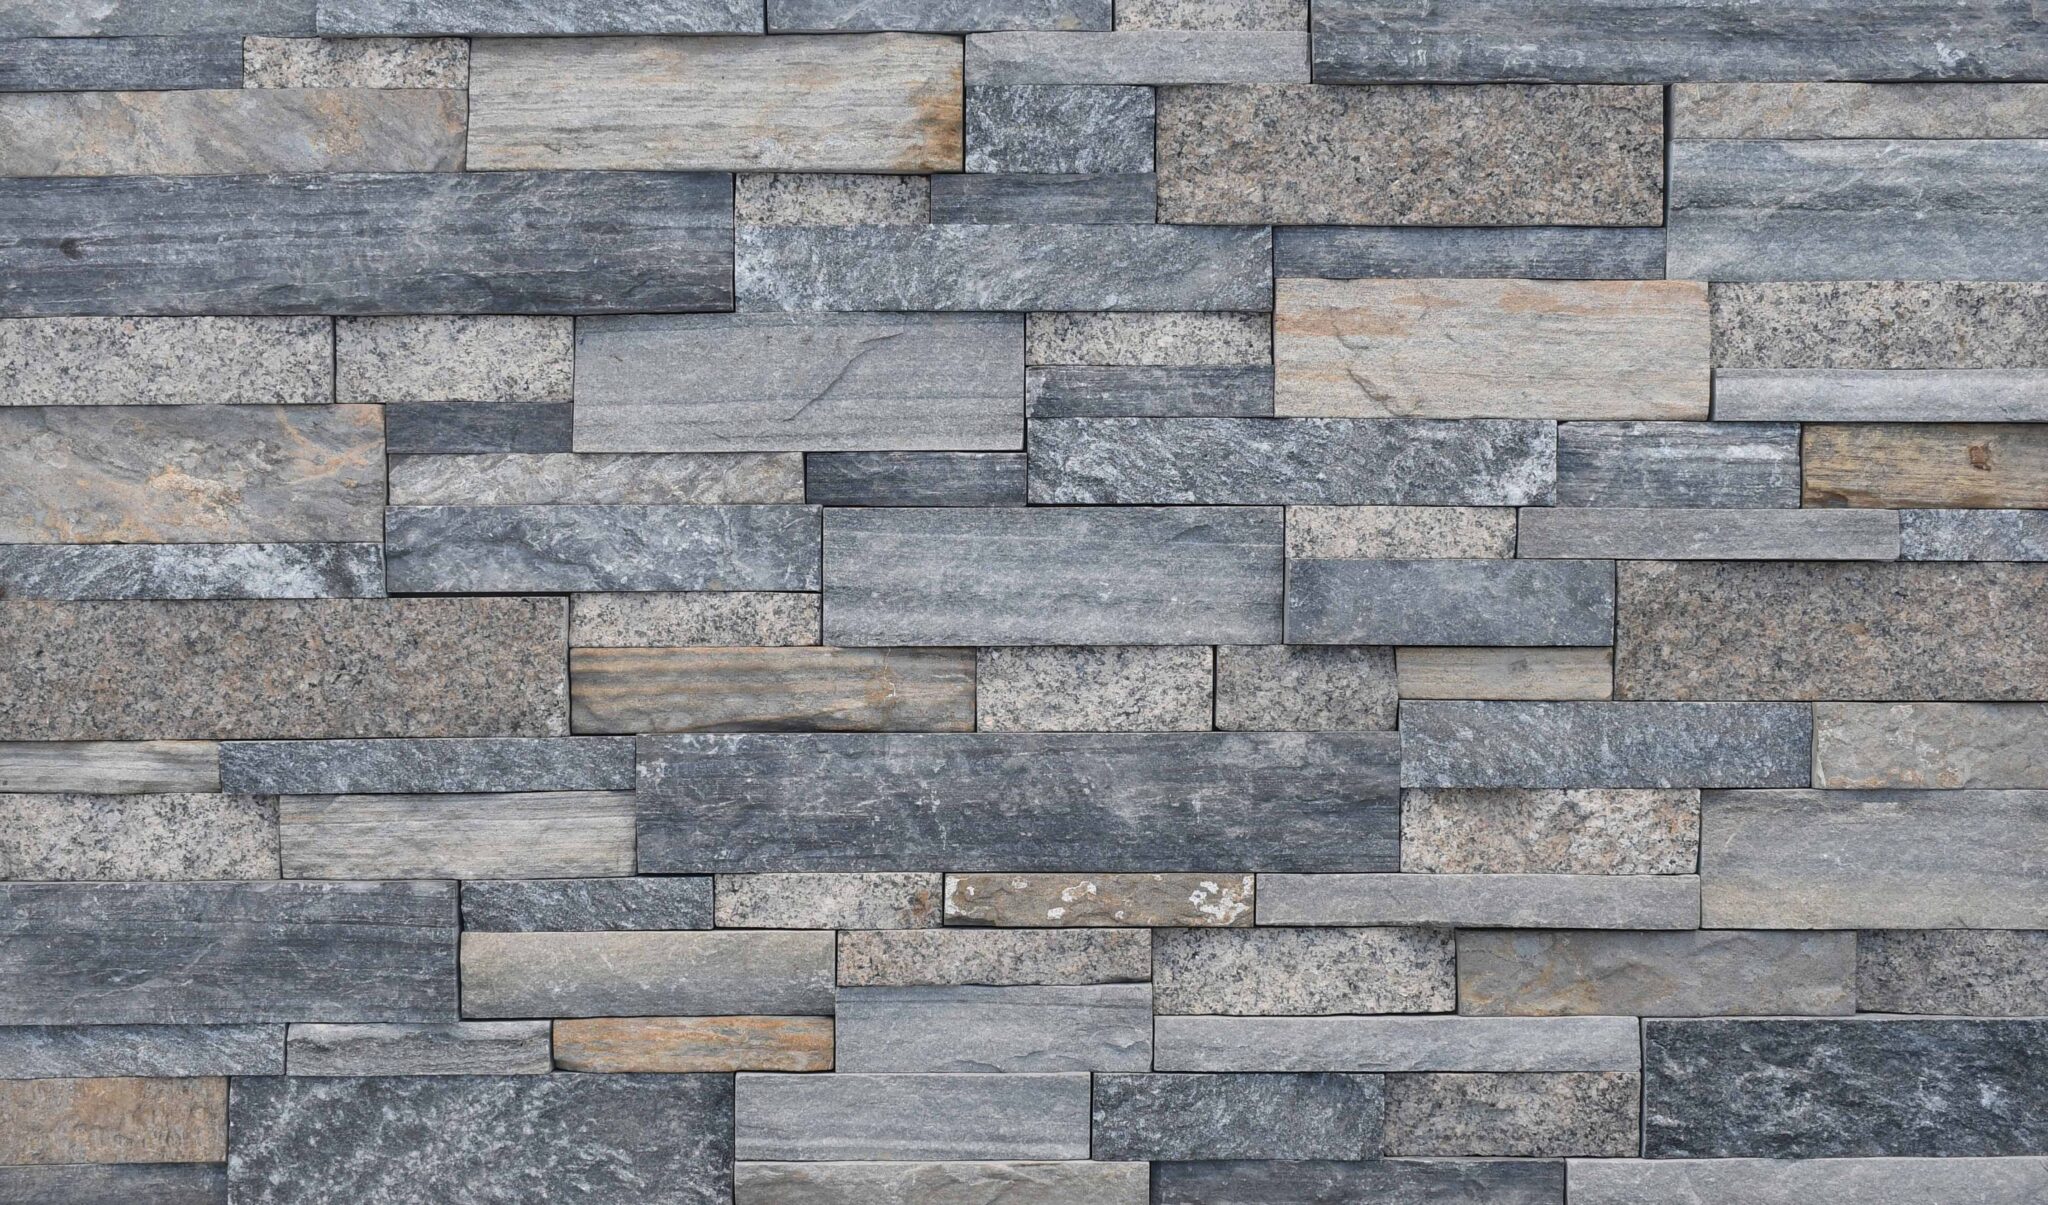 Pangaea® Natural Stone - Terrain Formfit Ledgestone, Providence with tight fit mortar joints